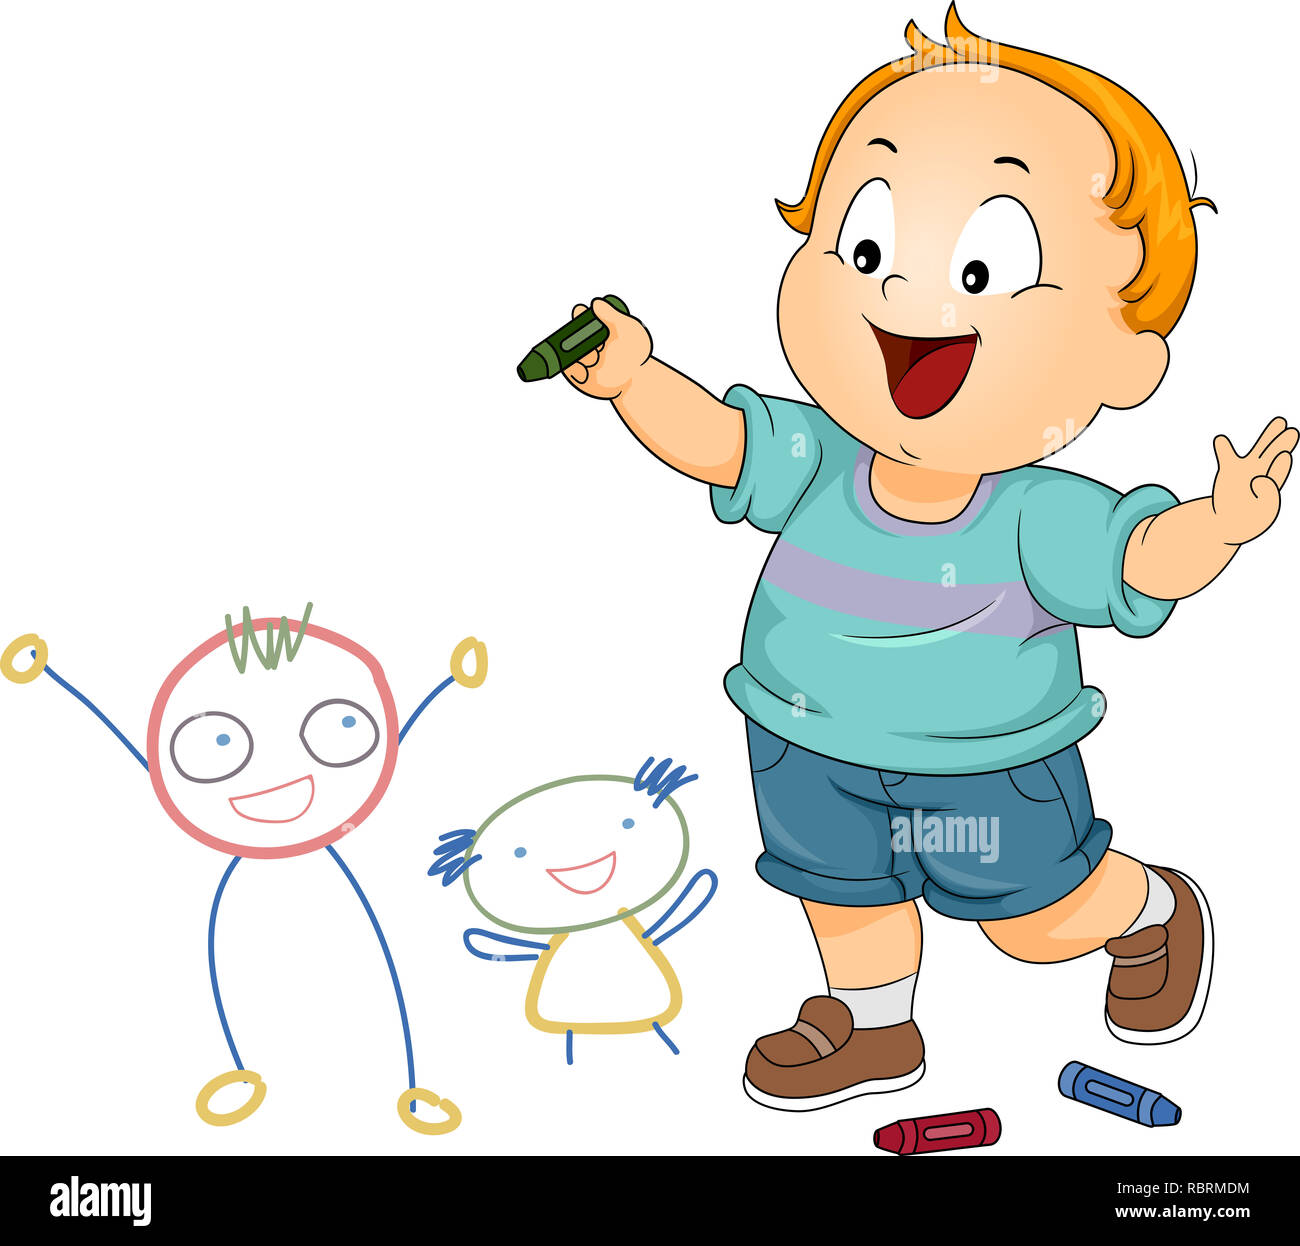 Illustration of a Kid Boy Holding a Crayon with Doodle Friends Stock Photo